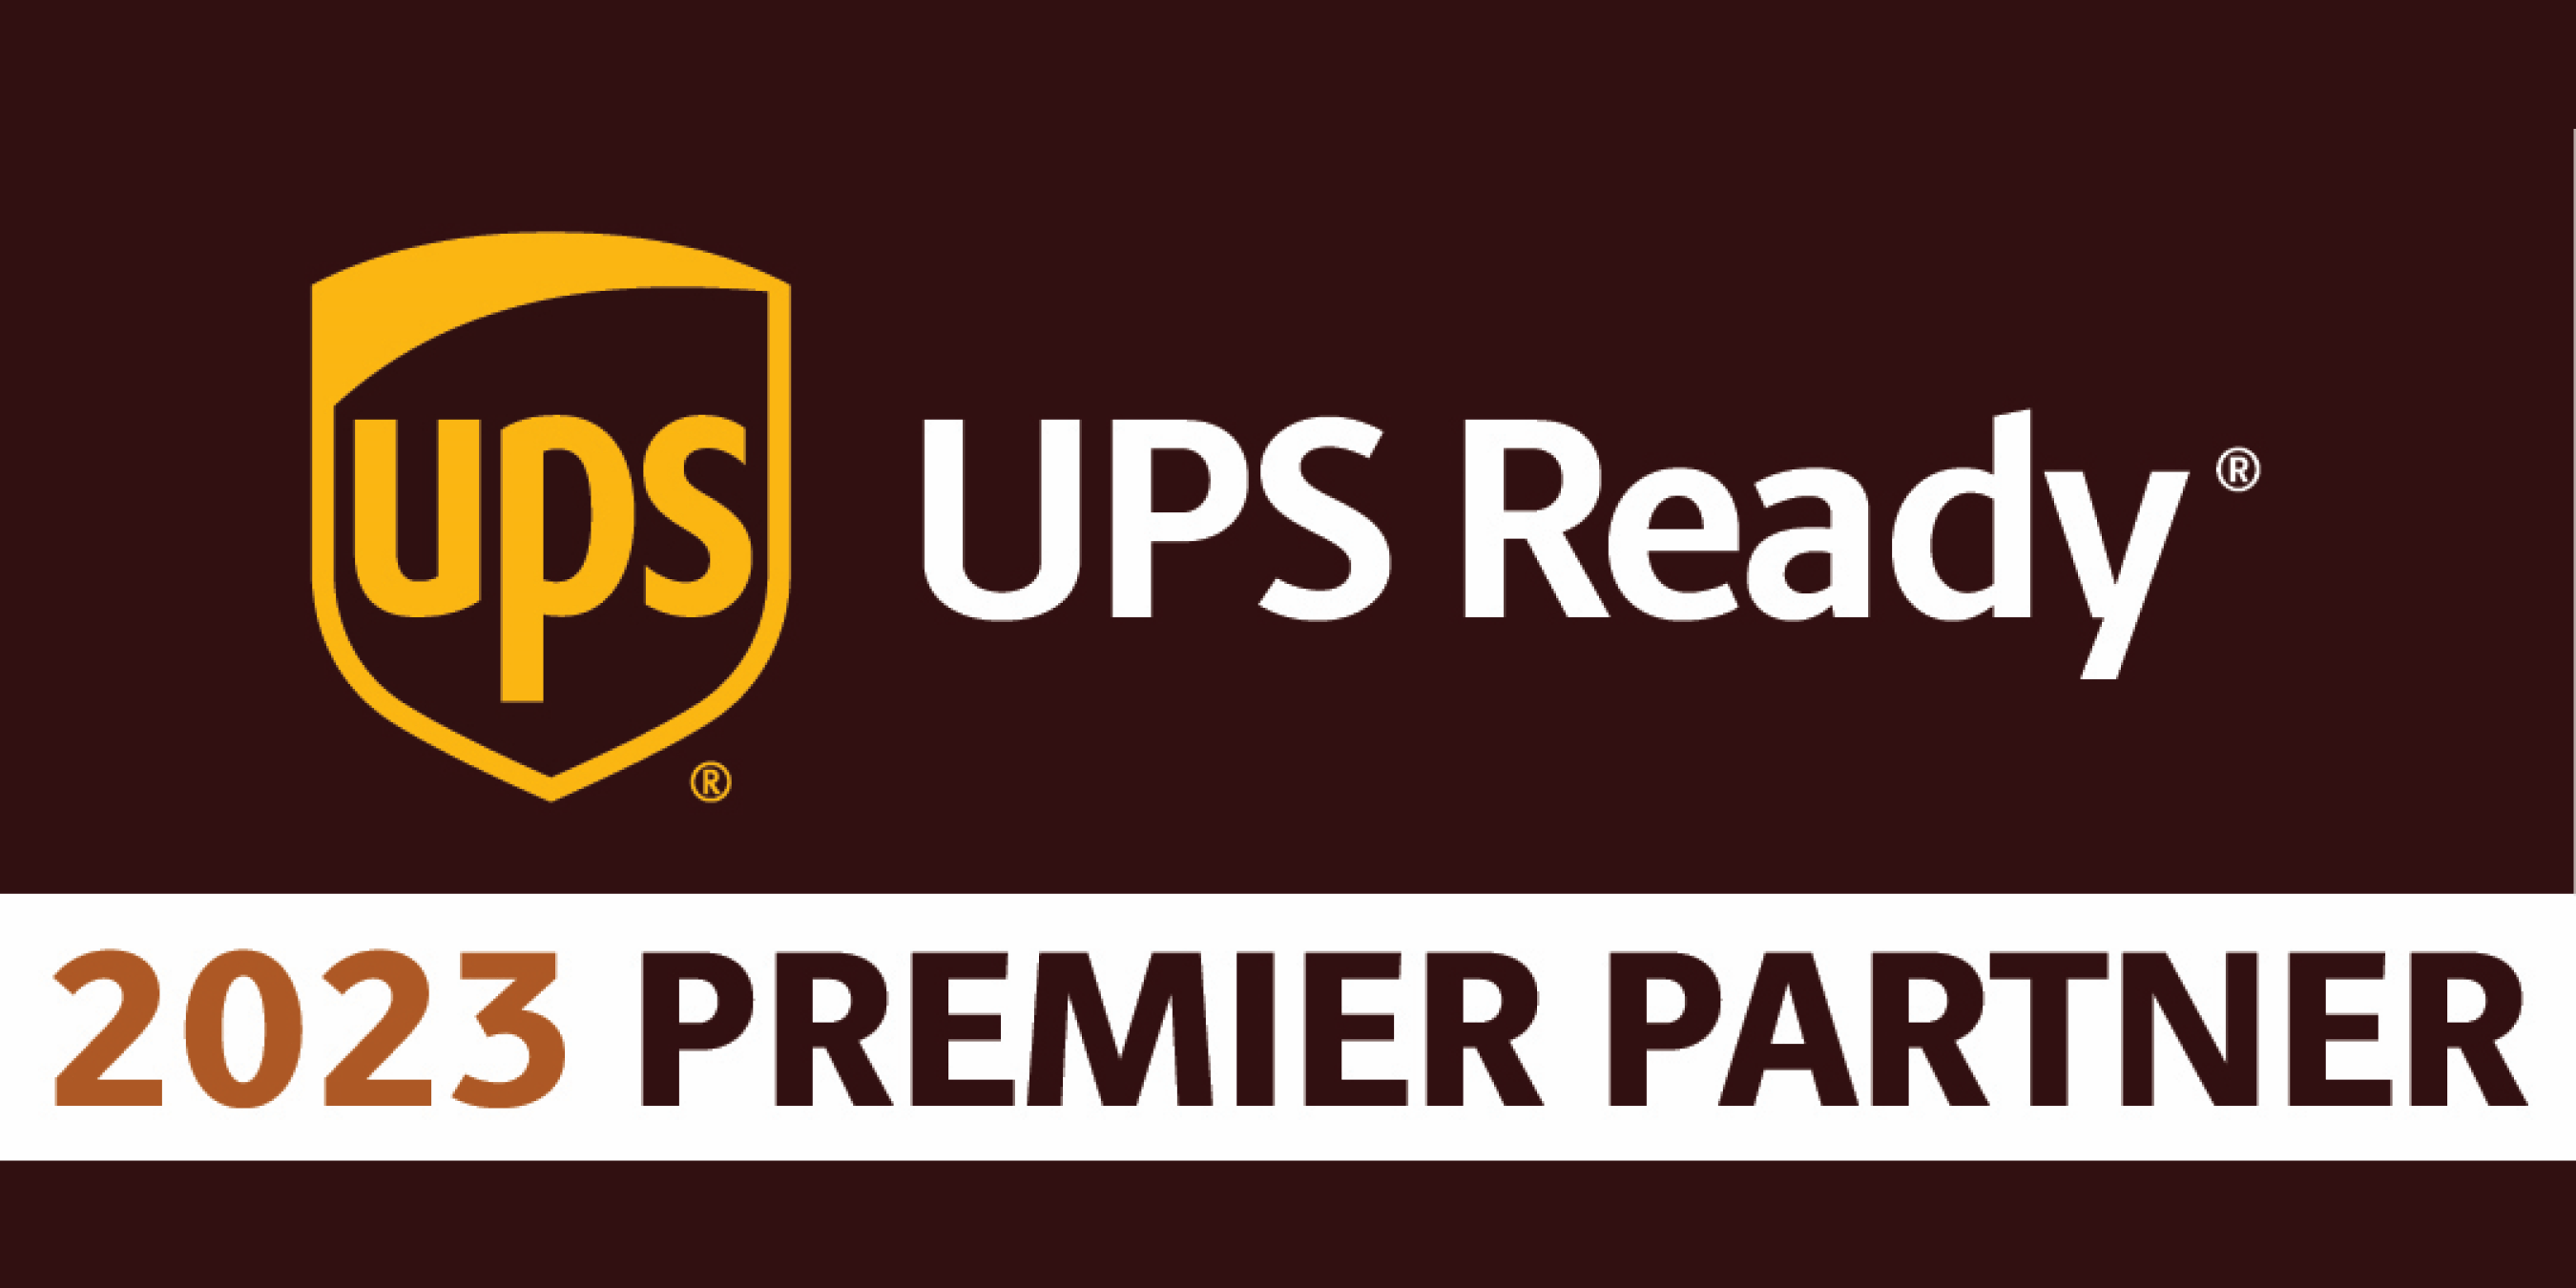 ShipperHQ Secures the UPS Ready® Premier Partner Award for 2023